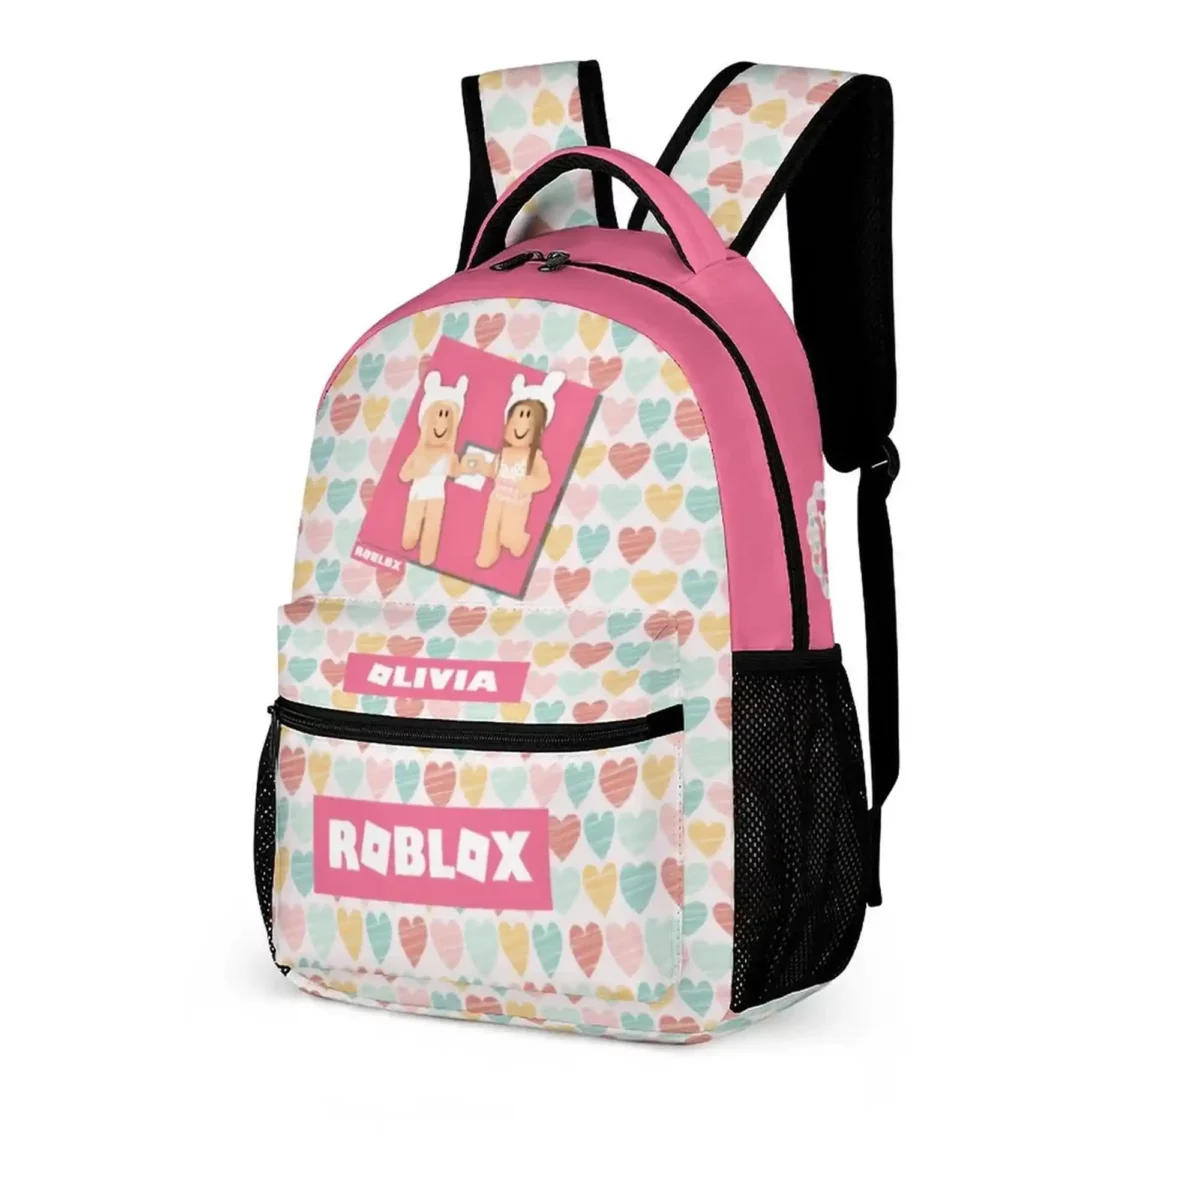 Personalized Roblox Girl’s Backpack with Pastel Hearts Background Cool Kiddo 16